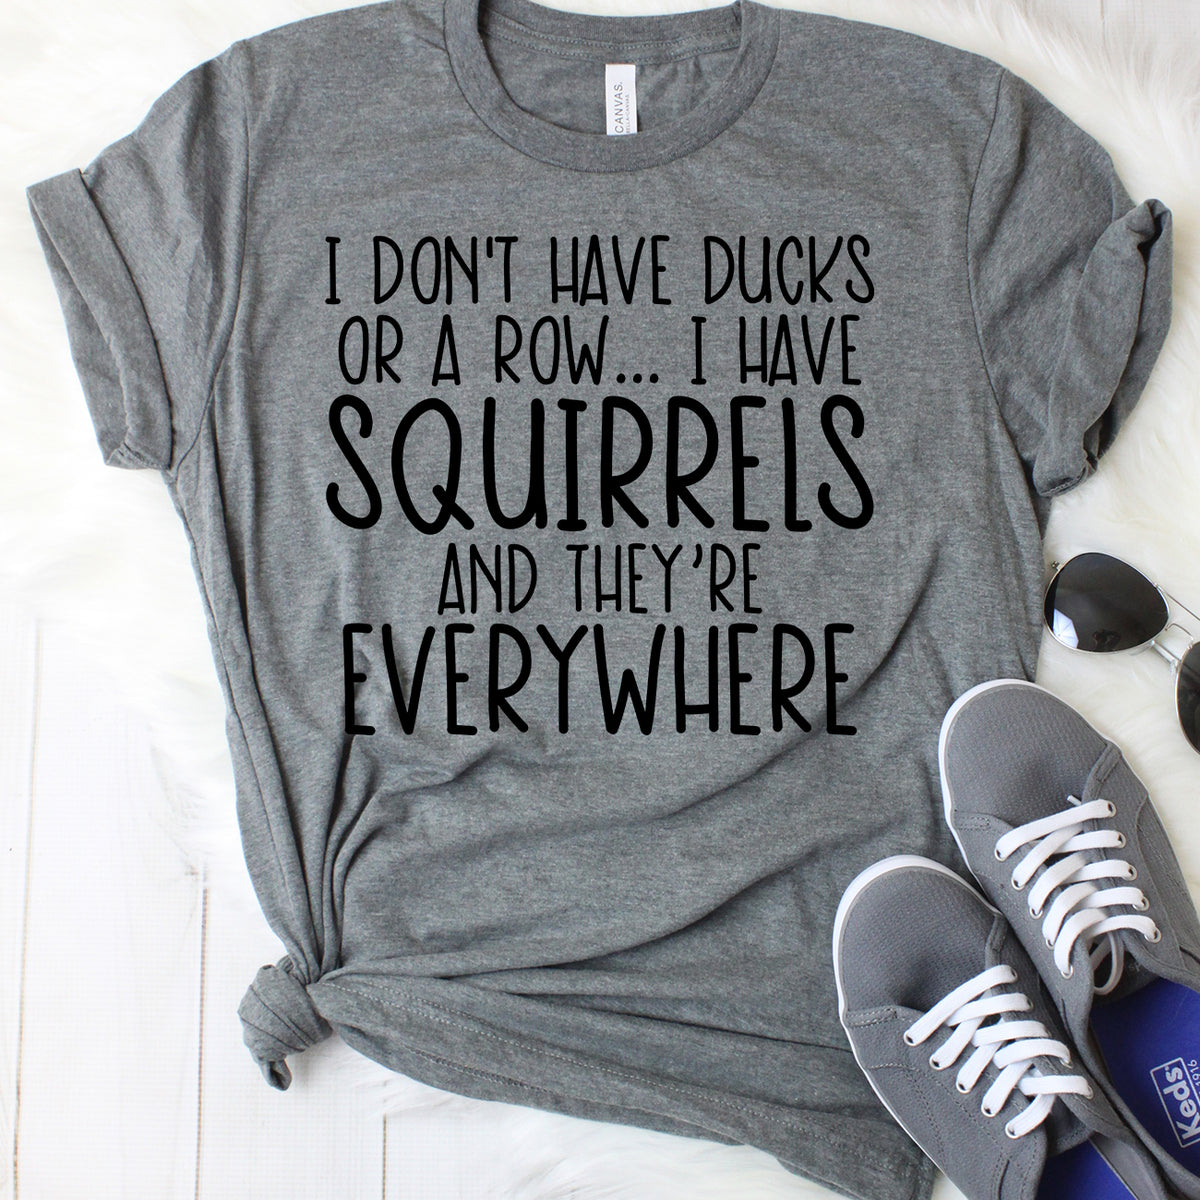 I Don't Have Ducks or a Row... I Have Squirrels and They're Everywhere Dark Grey T-Shirt